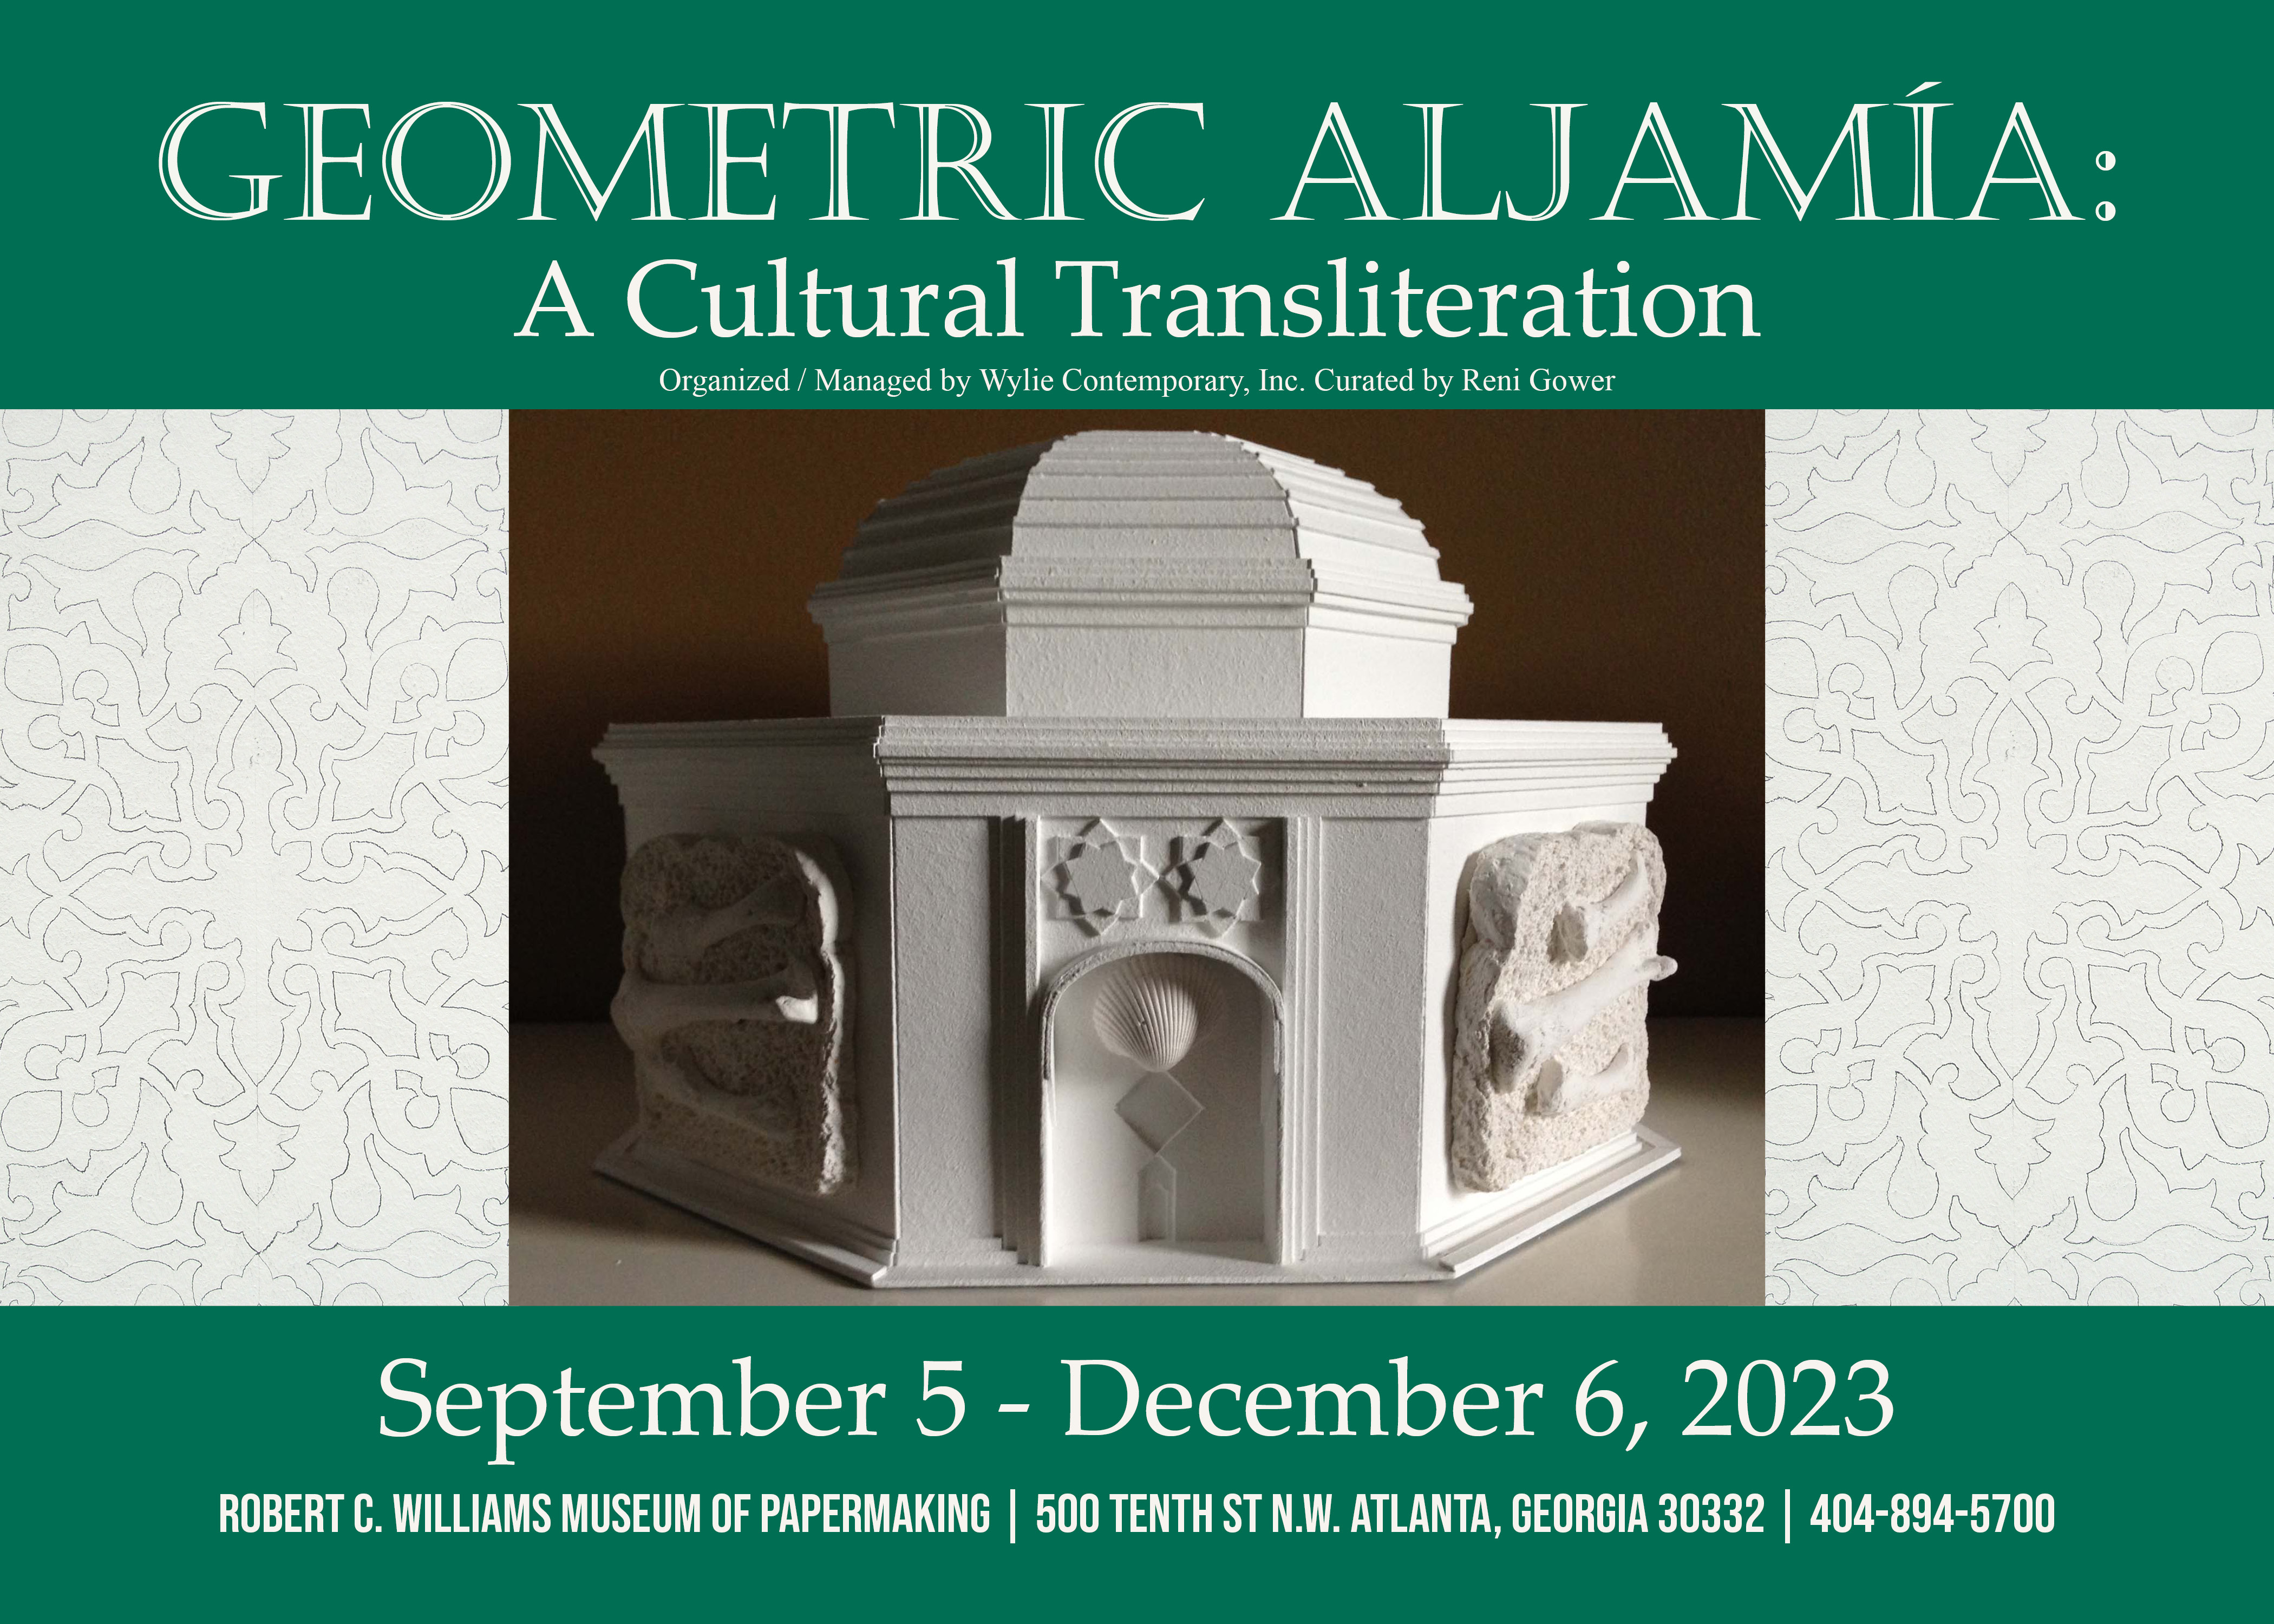 Two green strips with white text sit at the top and bottom of the image. The text at the top says Geometric Aljamia: A cultural transliteration. The text at the bottom says September 5 thru December 6, 2023 with the address in smaller letters below. Between the two strips is a photograph with graphite traced arabesque patterns on the right and left of the photograph. The centeral image is an all white paper sculpture by Jorge Benitez. The sculpture is hexagon shaped with a dome top. the front door has two stores that hang above it and the walls on either side of the door have a cast of a slice of bread with chicken bones resting on the slice.